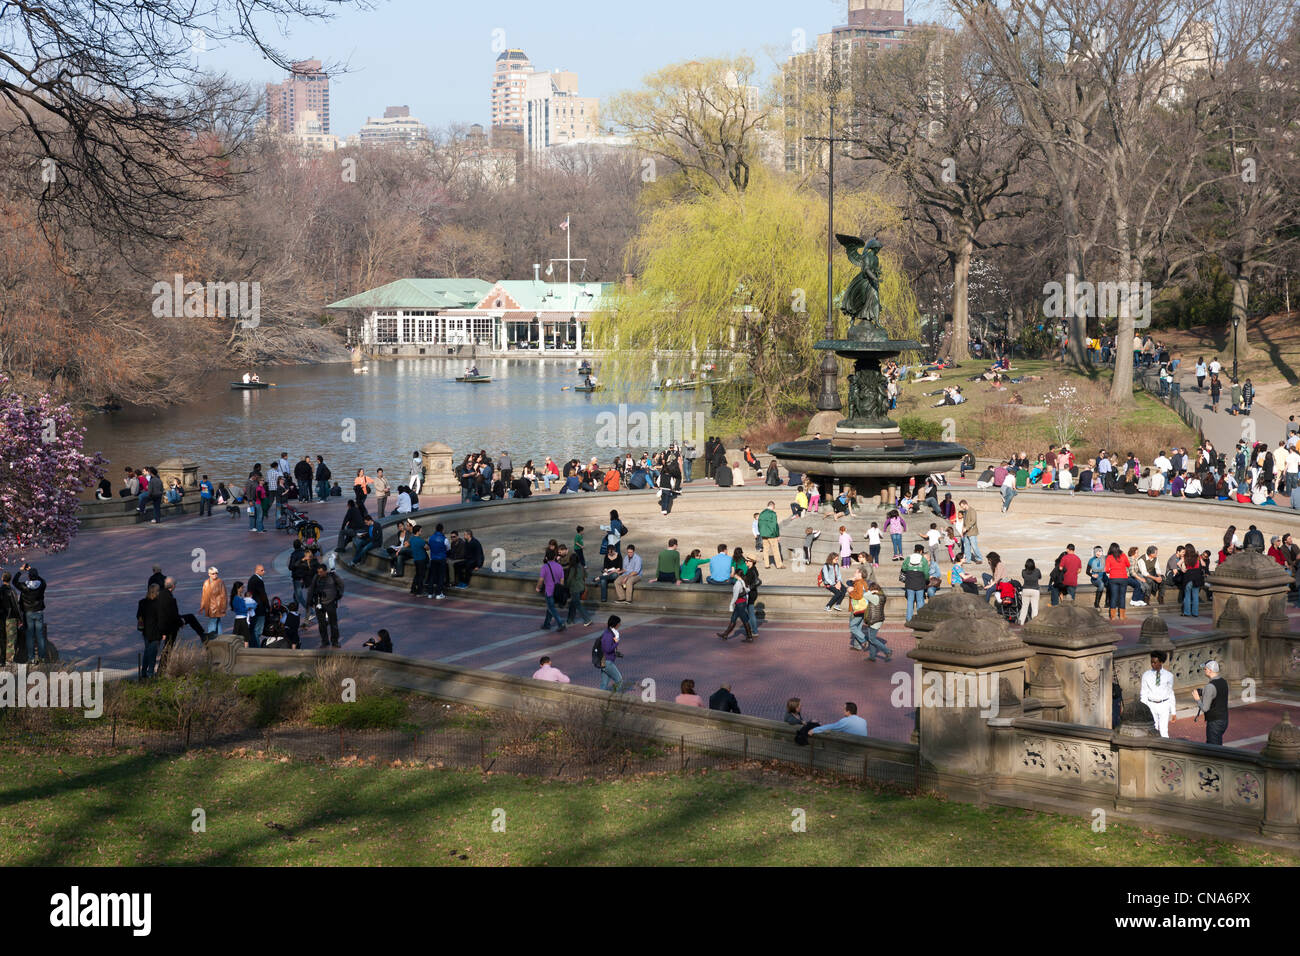 People enjoy the area around Bethesda Fountain in Central Park on a warm late winter day in New York City. Stock Photo